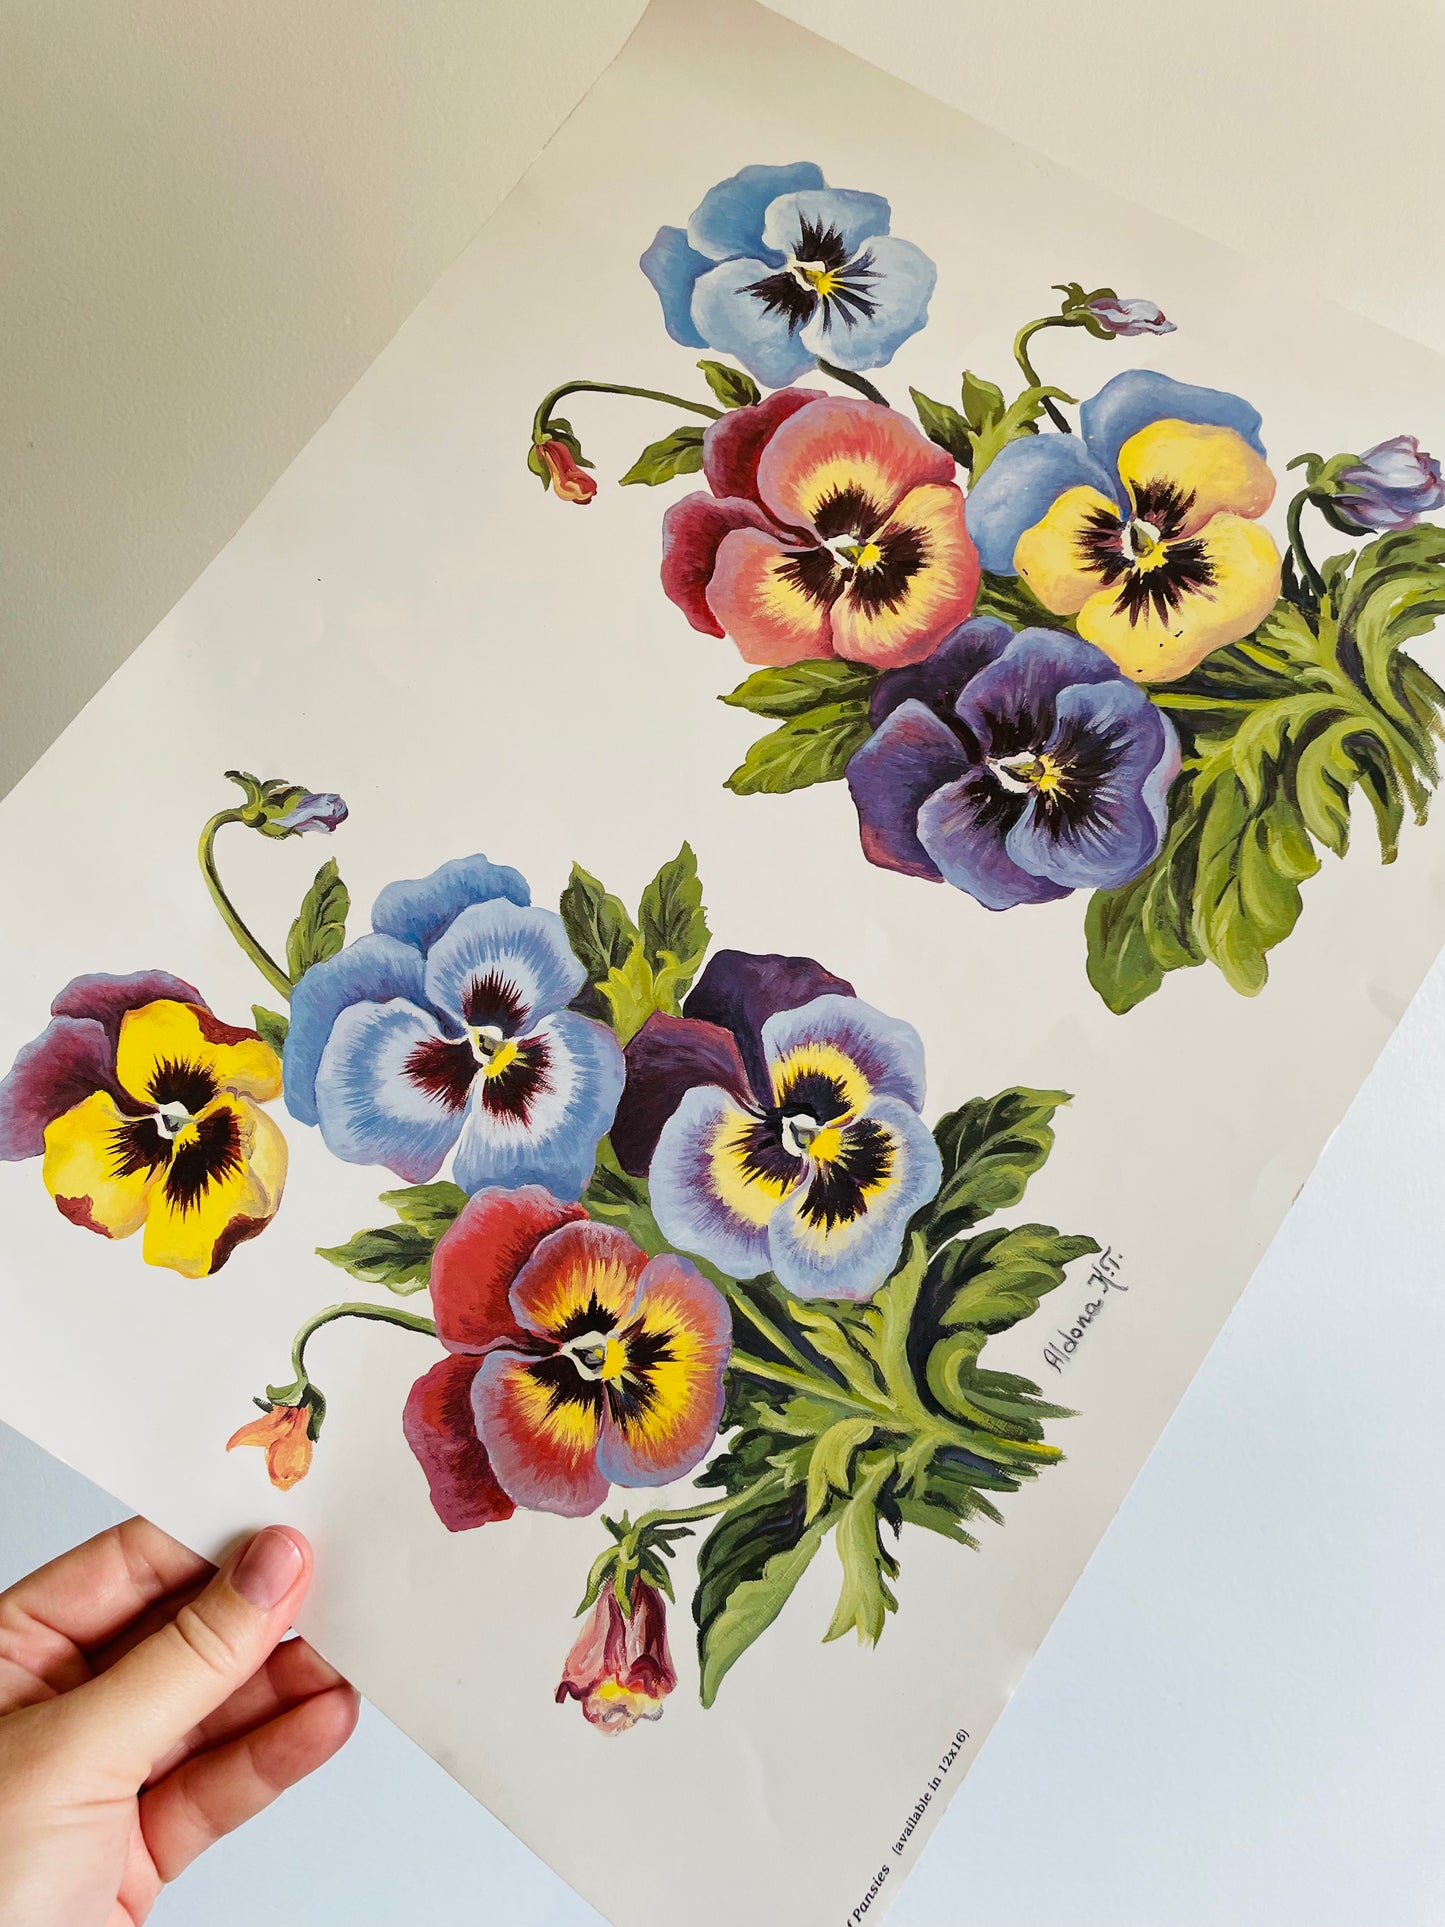 Pair of Pansies Poster Print - Ready for Framing! Printed in Canada (1986)